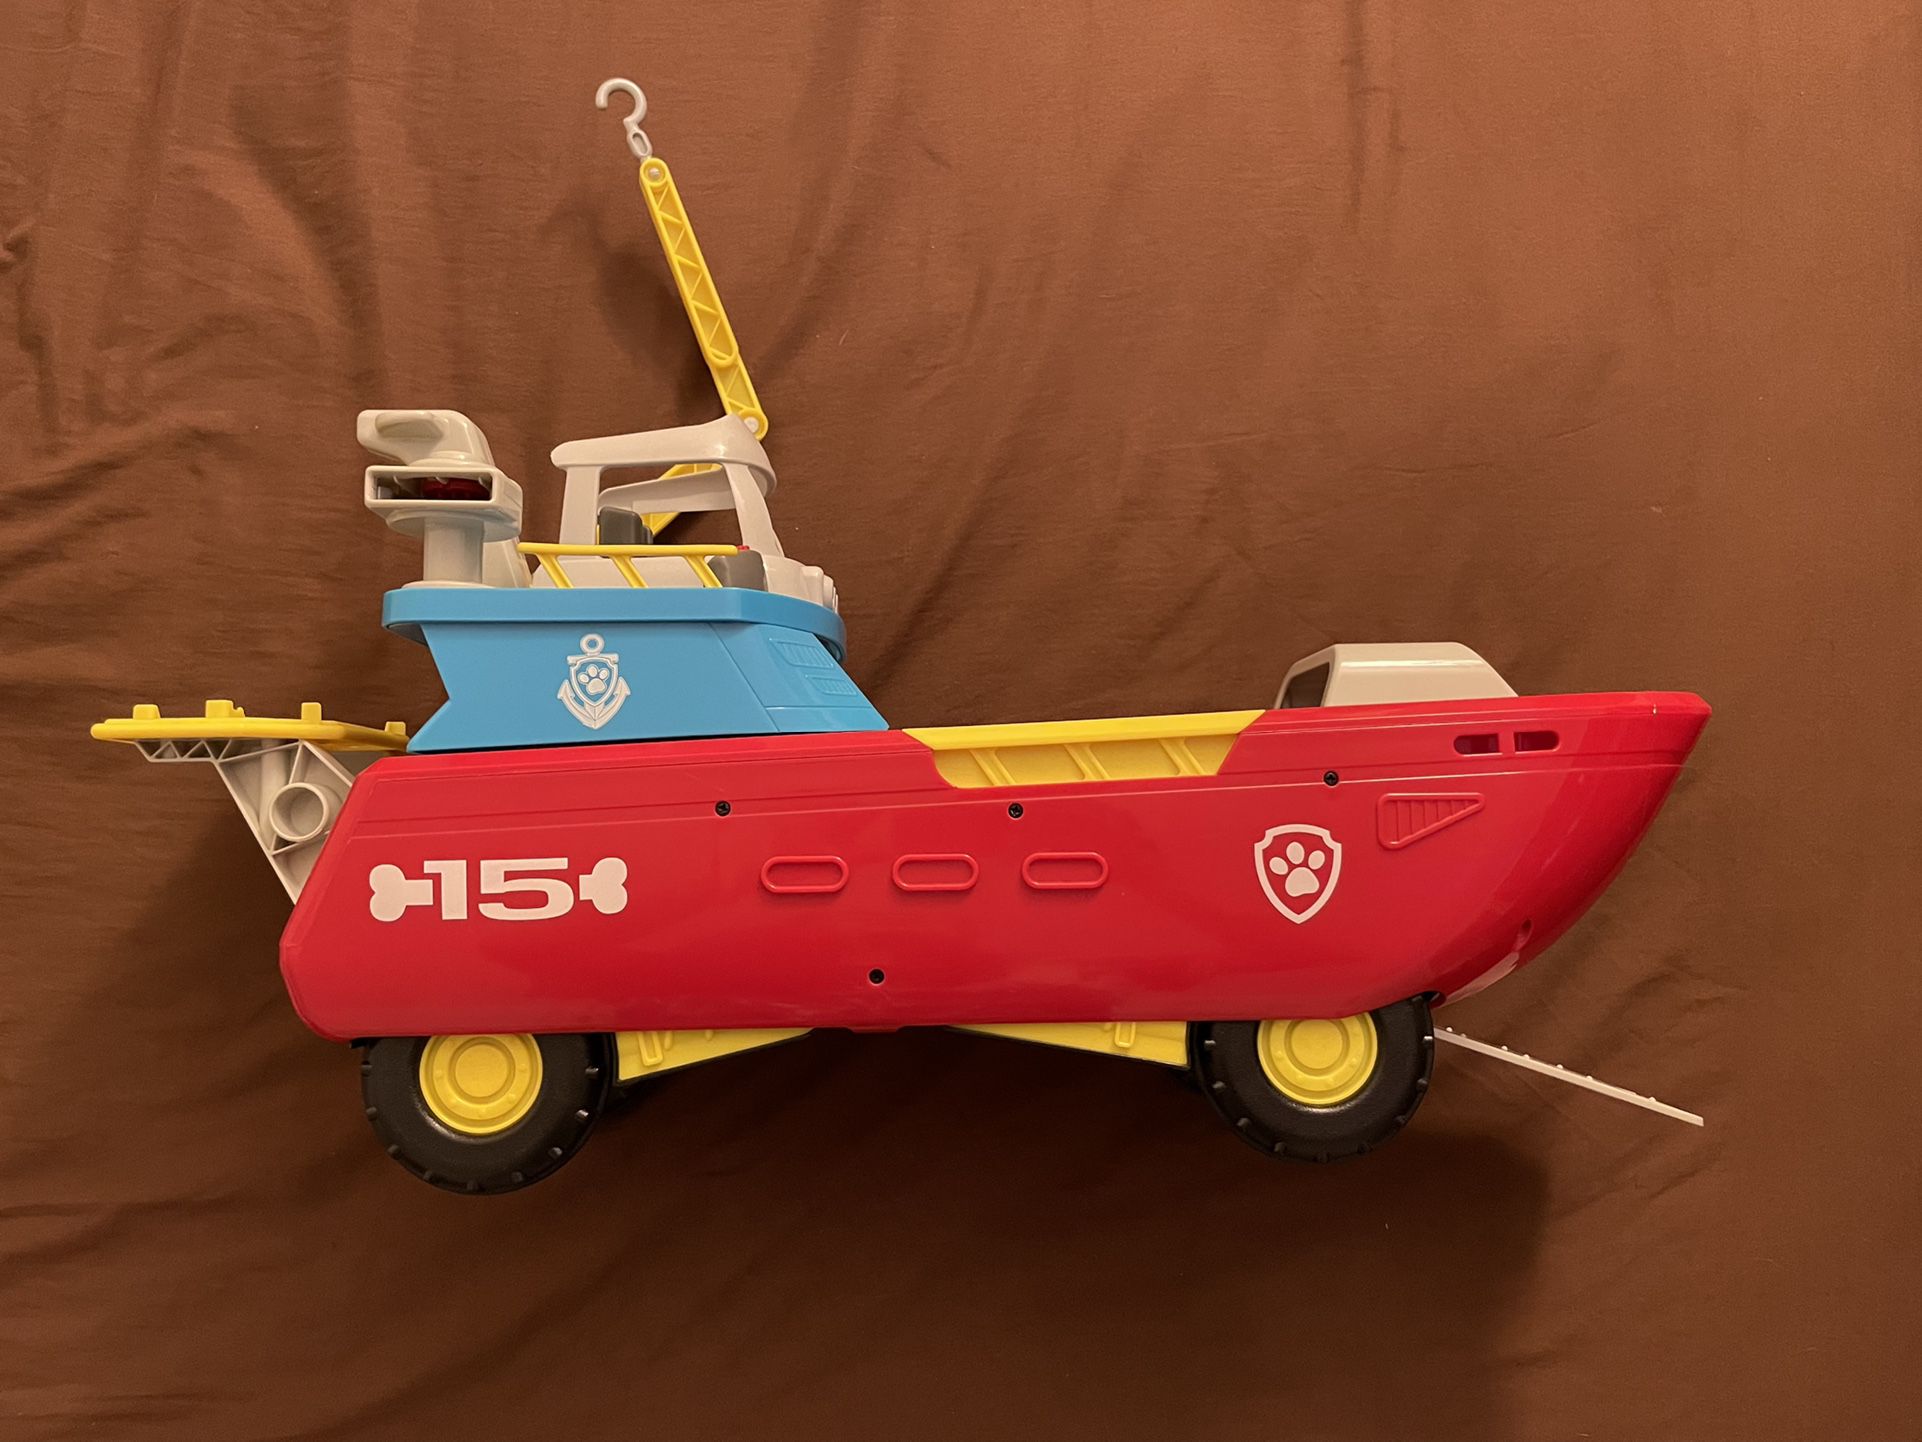  Paw Patrol Sea Patrol, Sea Patroller Transforming Toy Vehicle  with Lights & Sounds, Ages 3 & up : Toys & Games